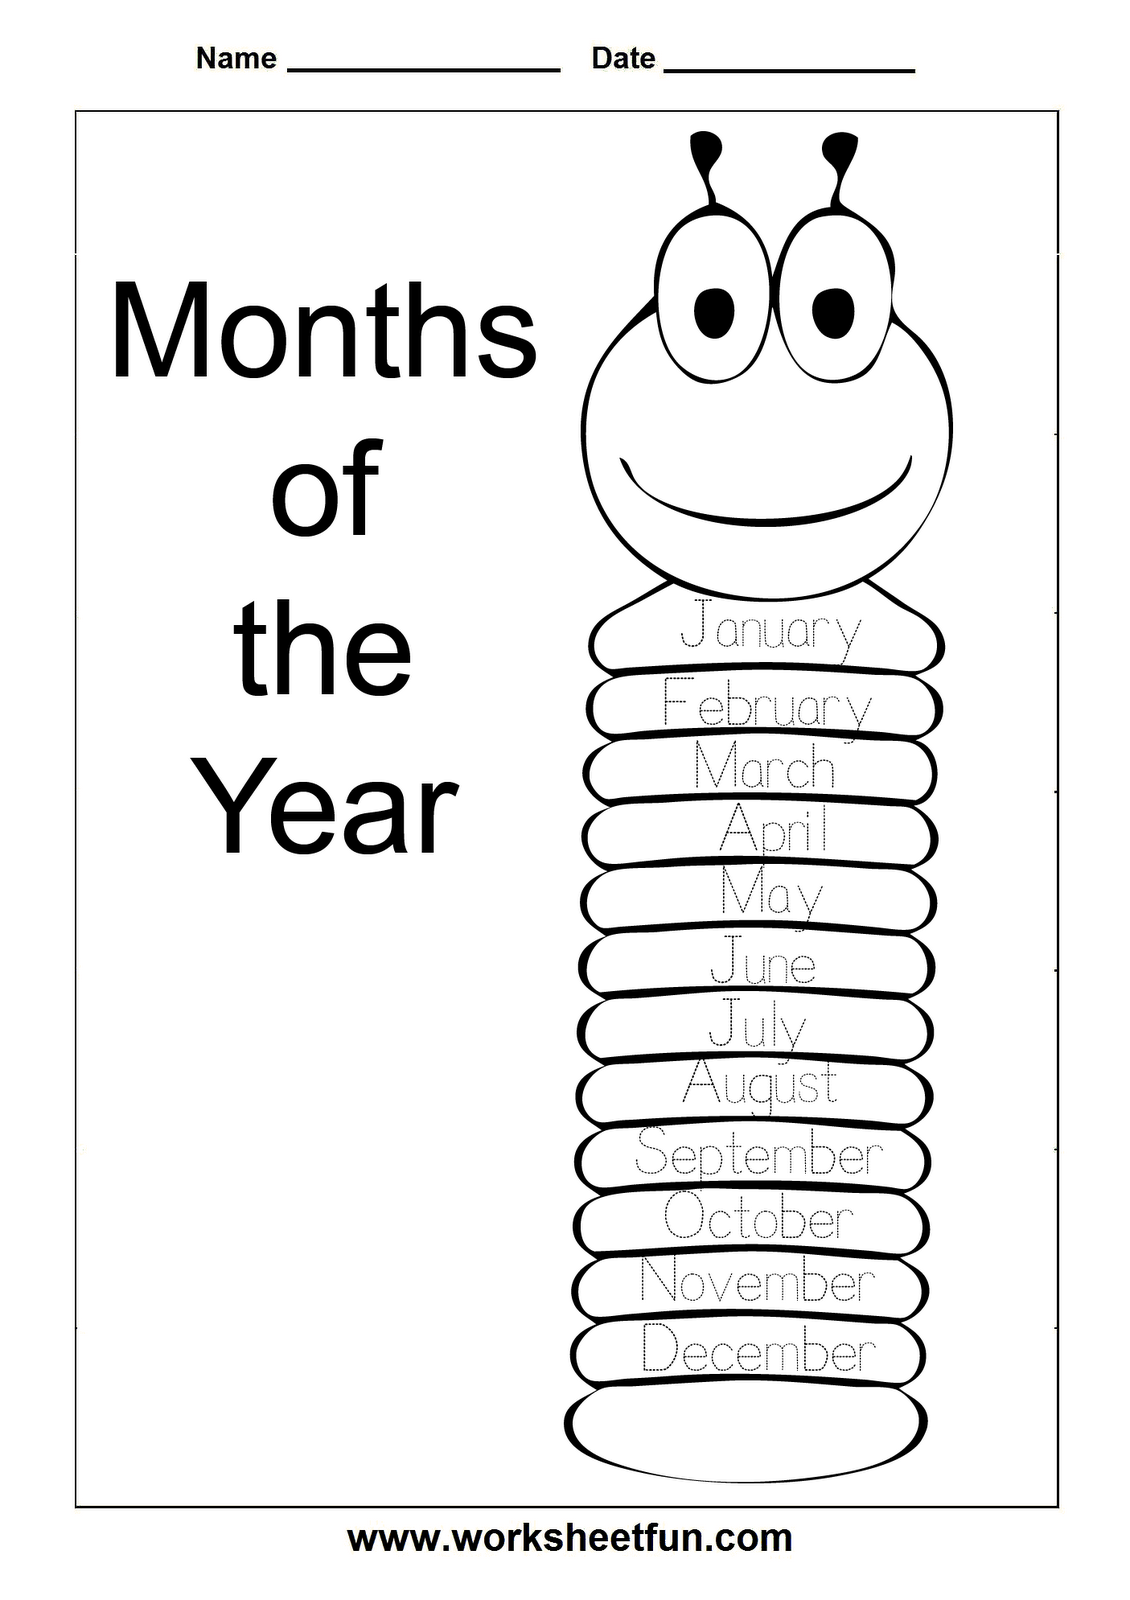 months-of-the-year-tracing-worksheets-alphabetworksheetsfree